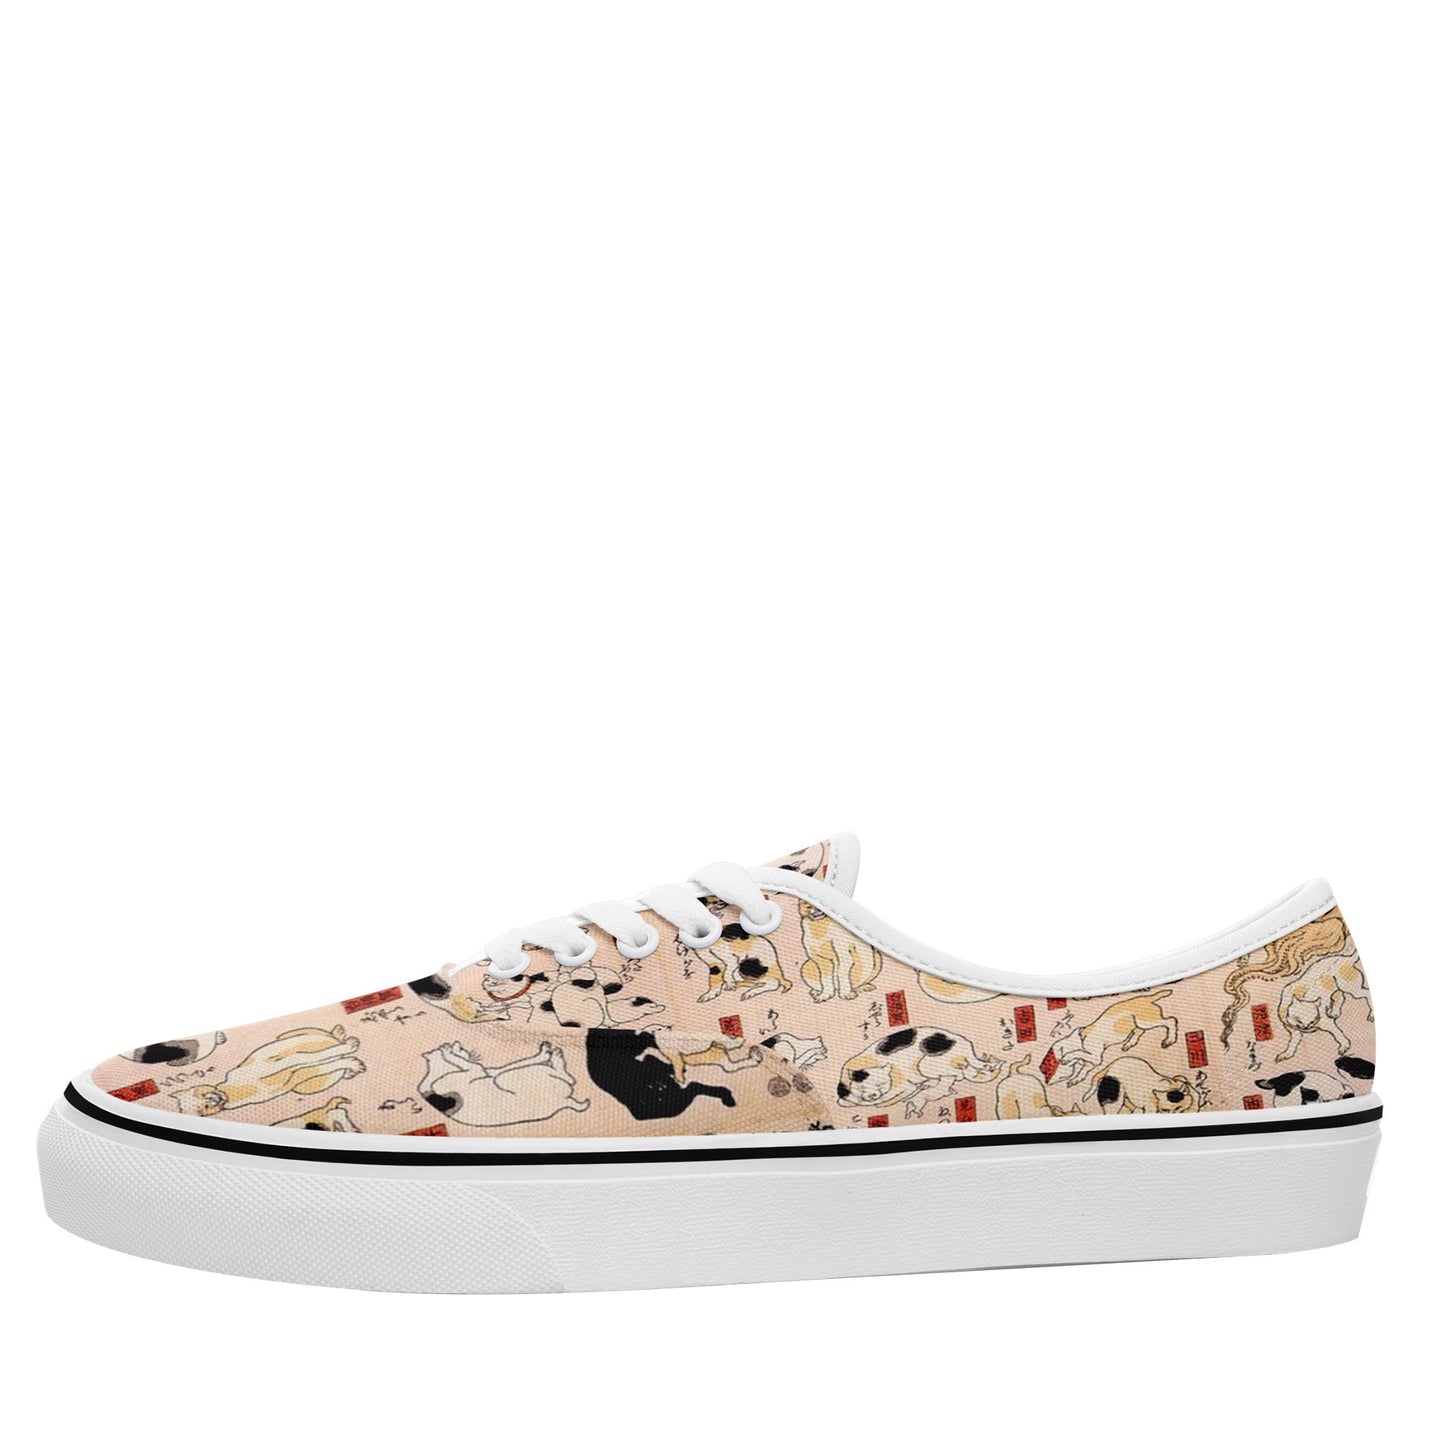 customize printed casual shoes 7213 with retro art ukiyo-e kuniyoshi utagawa's cats suggested as the fifty three stations of the tokaido sneakers white soles 2